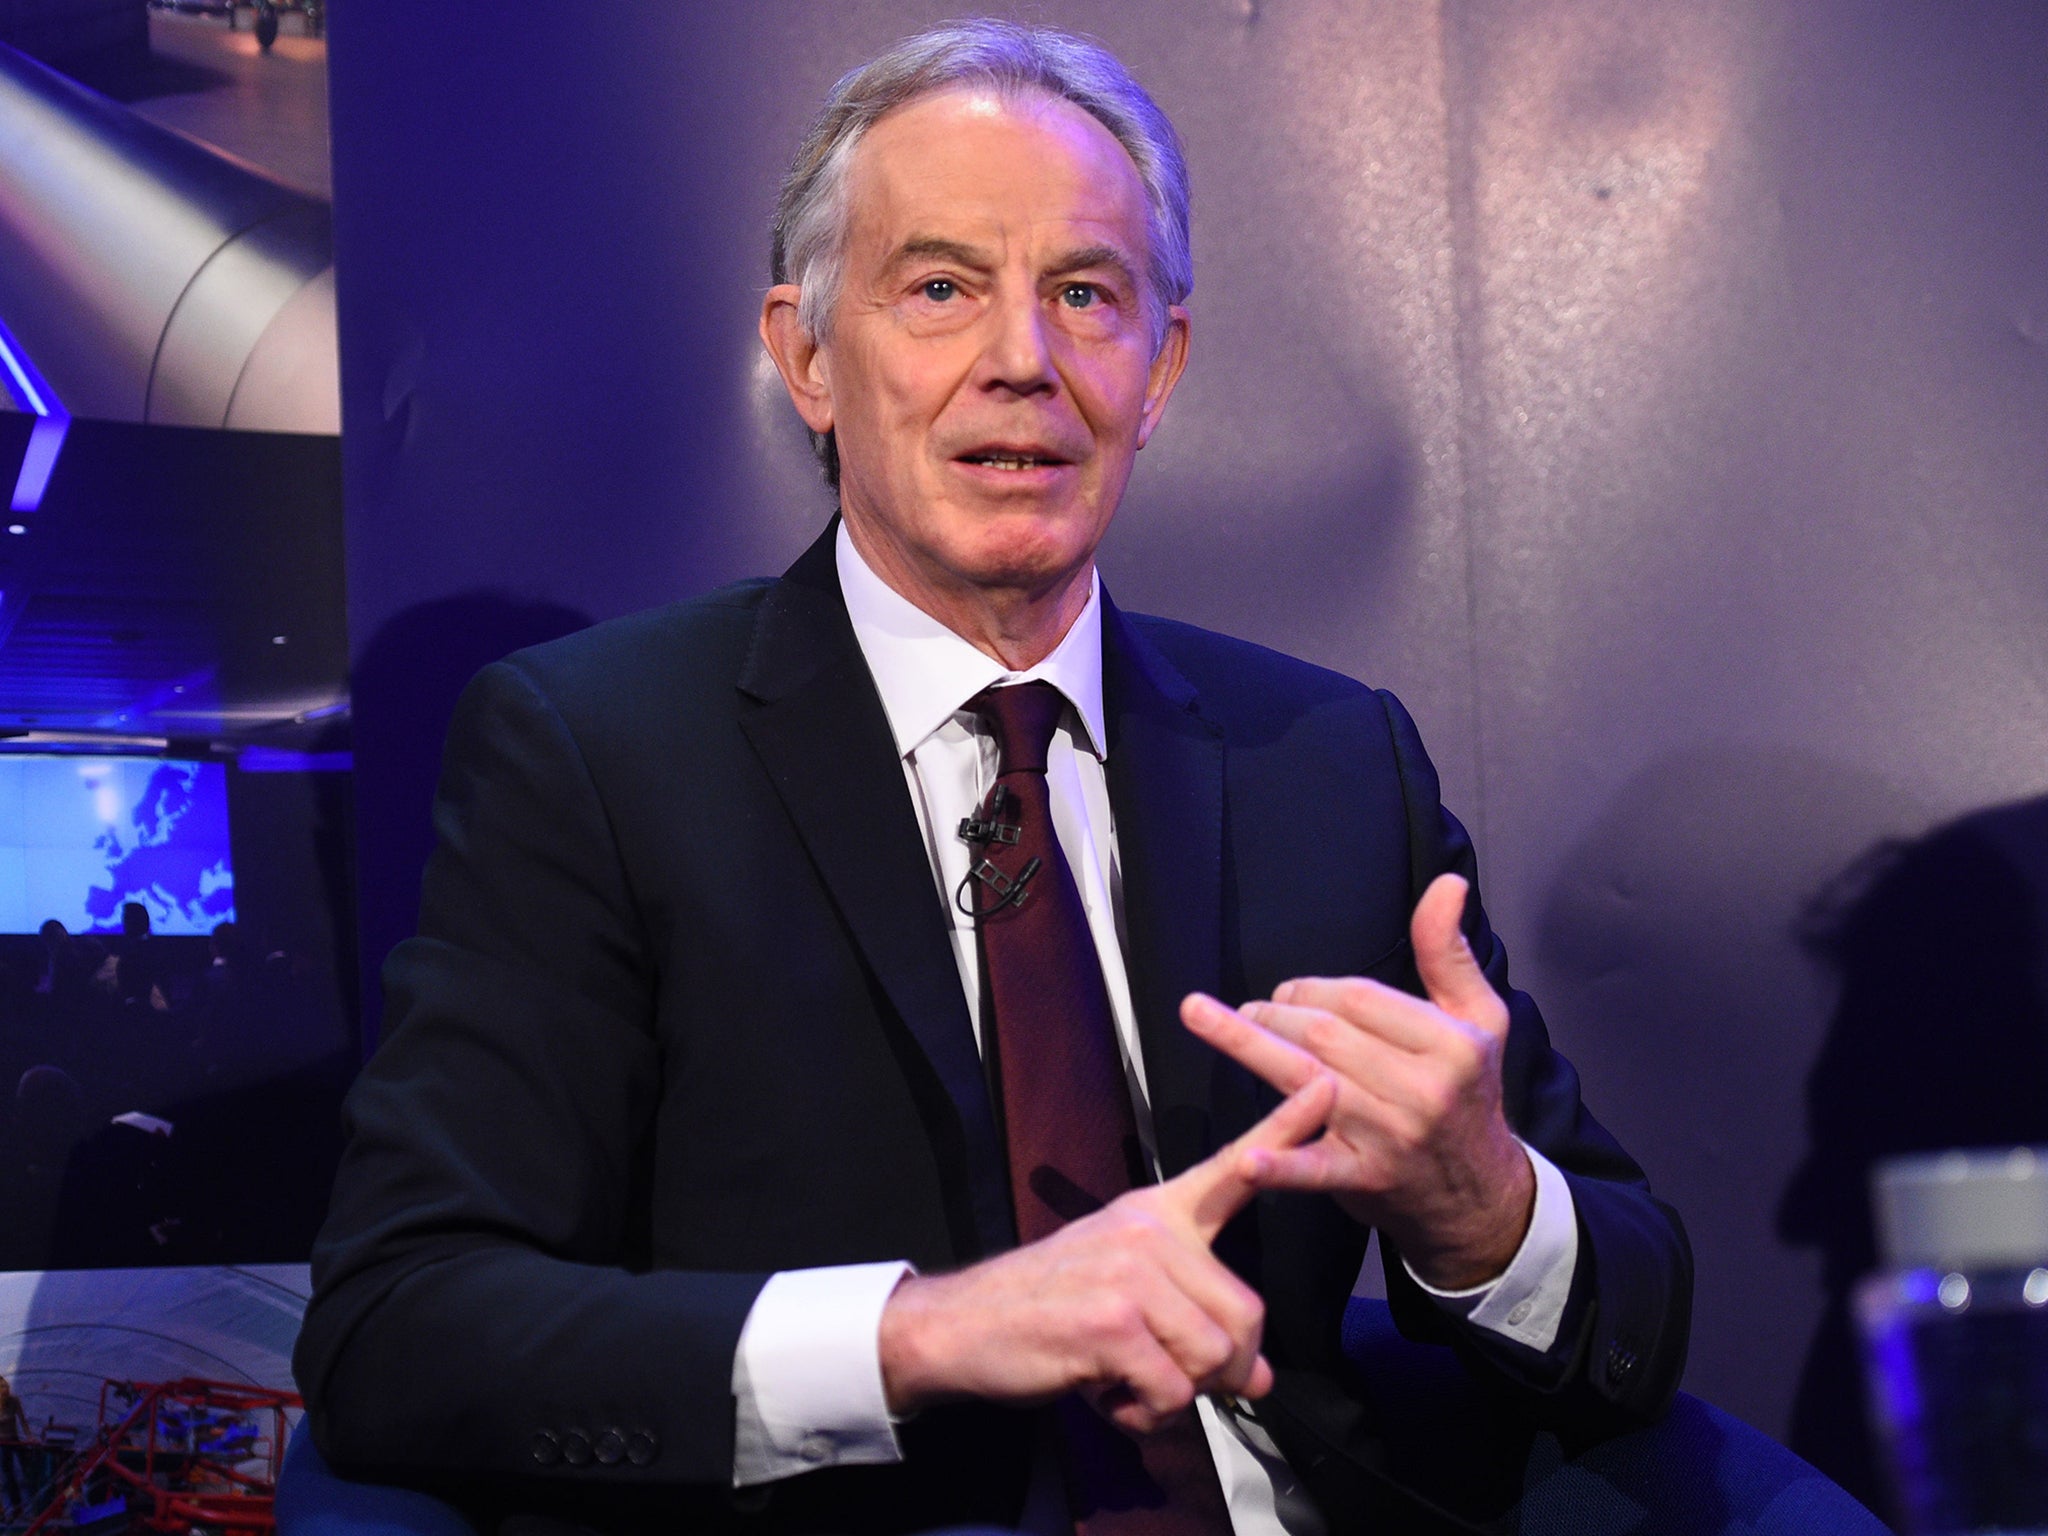 Former Prime Minister Tony Blair has backed The Independent's campaign